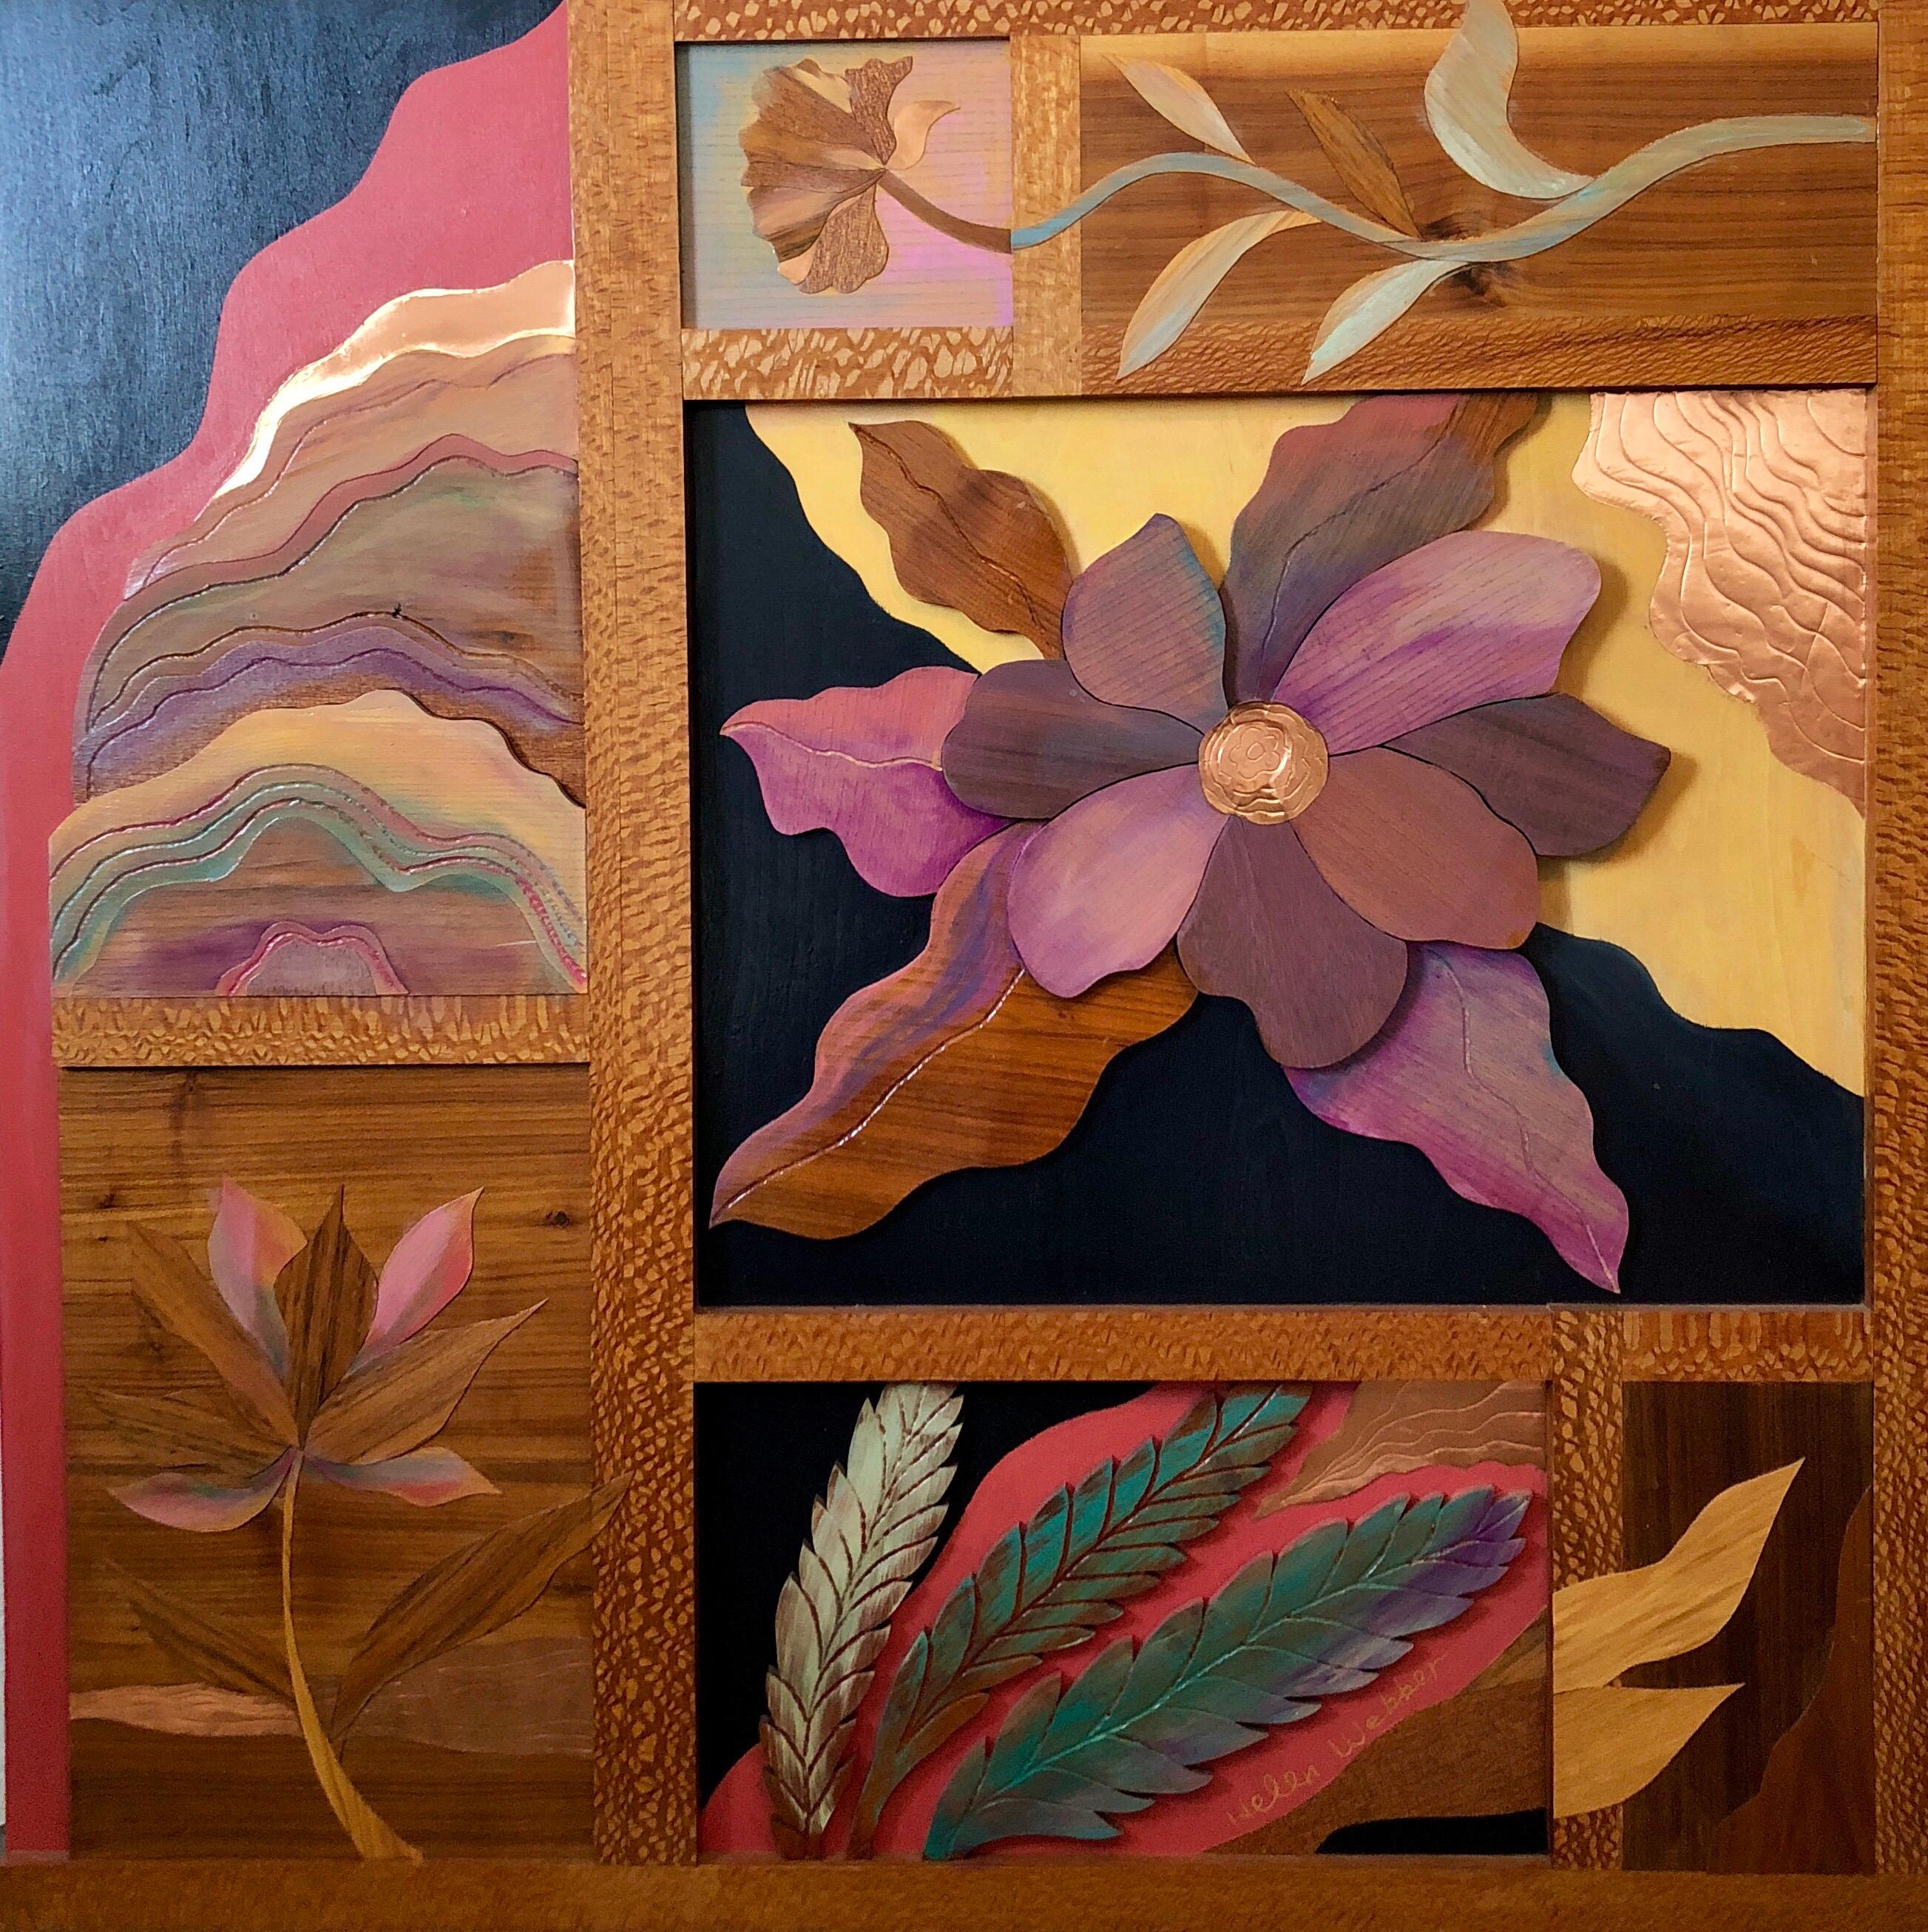 1970s  Large Wood, Copper Inlay Sculpture Wall Relief Tropical Flowers Motif - American Modern Painting by Helen Weber